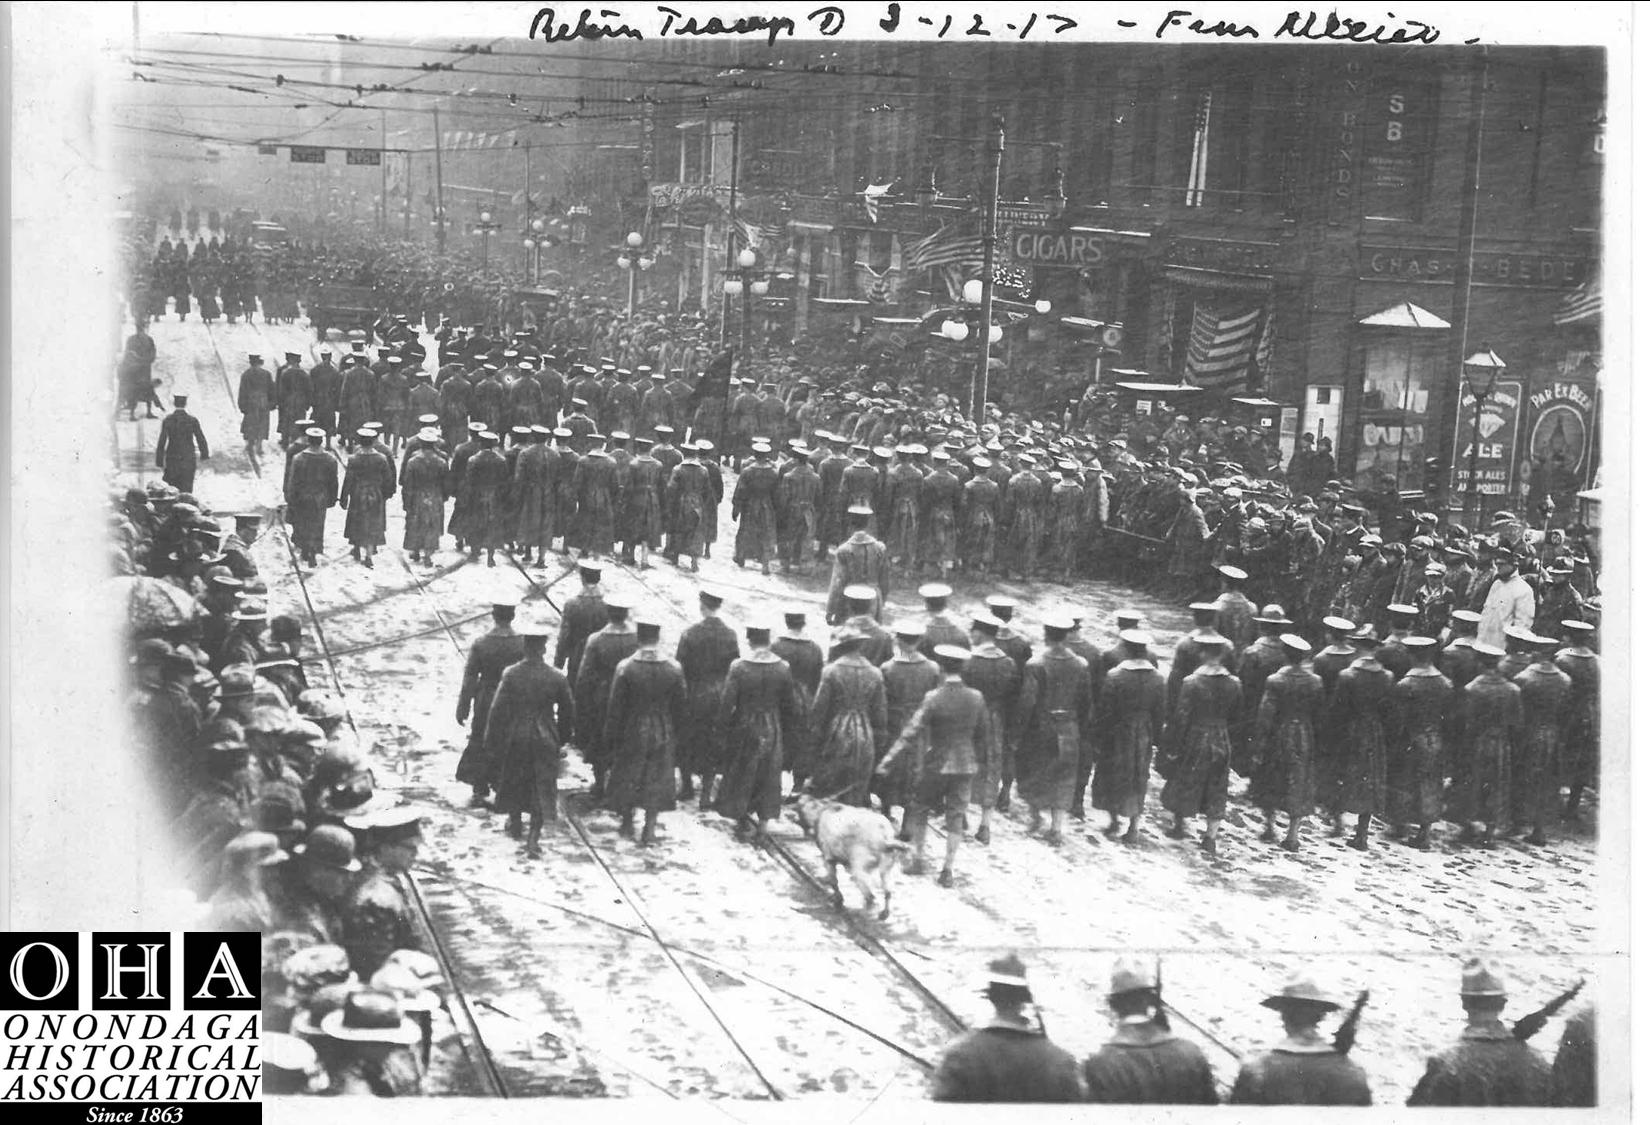 Soldiers Returning from Mexico Border, 3.12.1917